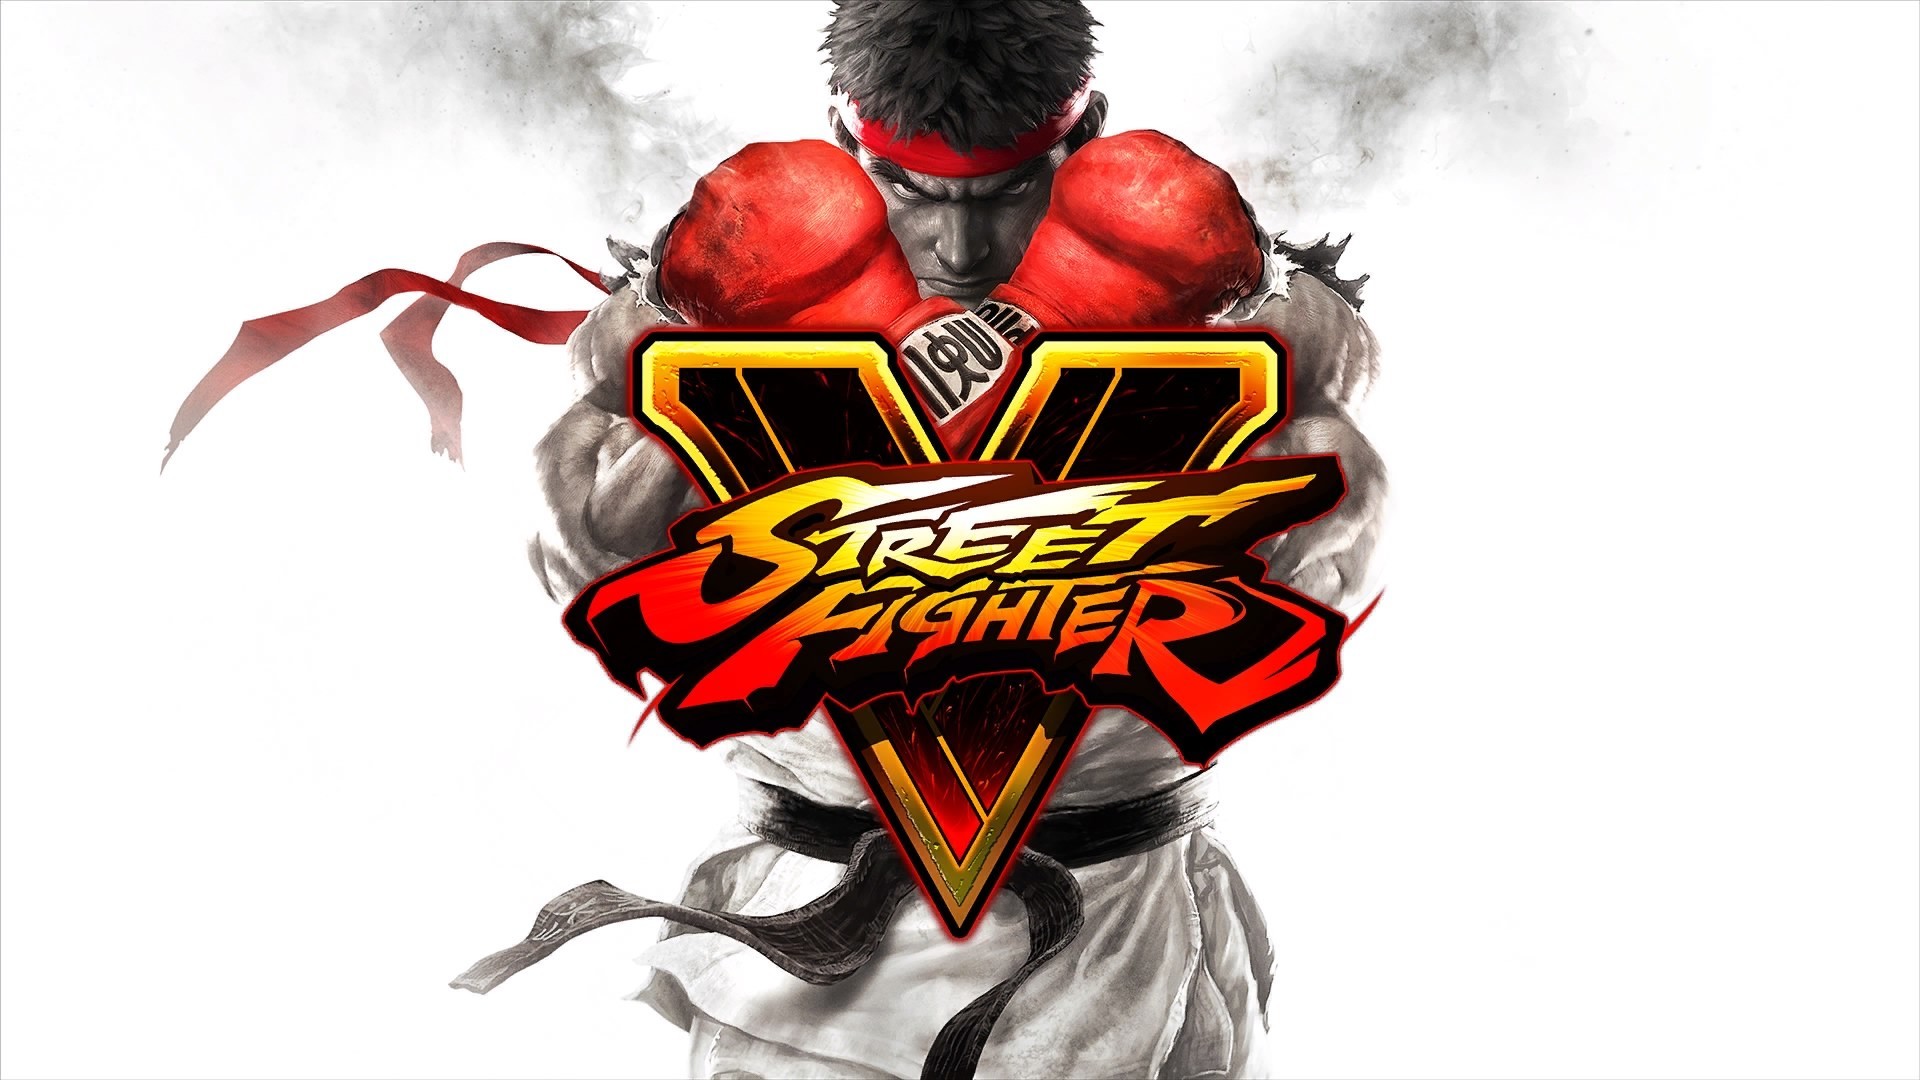 ryu street fighter wallpaper,hero,fictional character,technology,graphic design,games